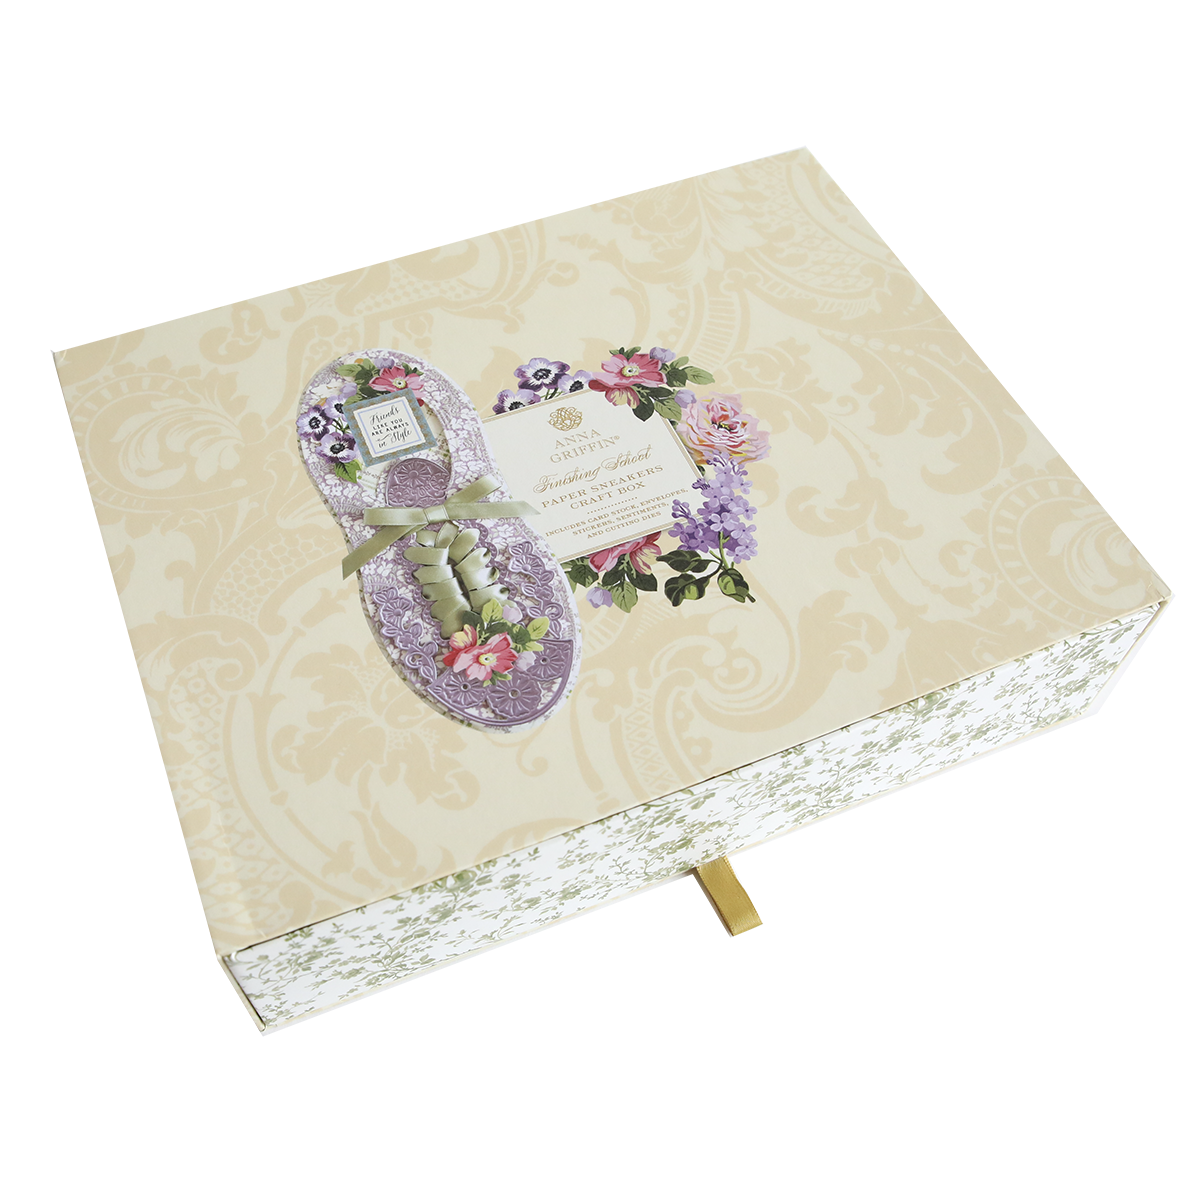 A floral-themed greeting card in the shape of Paper Sneakers on a patterned beige background with a gold ribbon, inspired by paper sneakers.